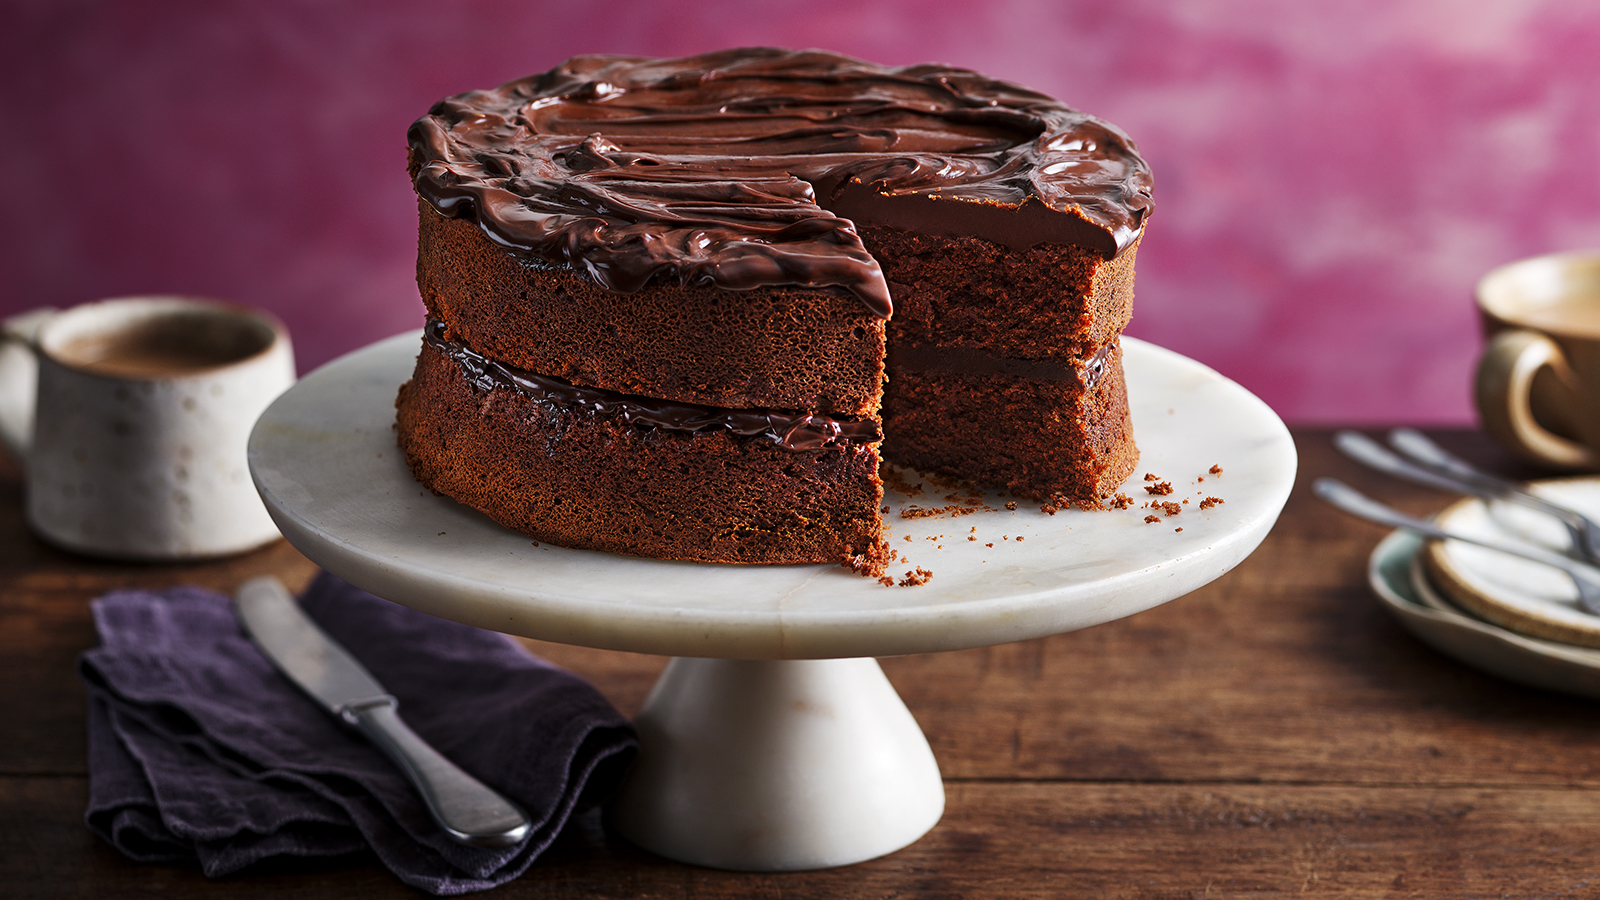 Gluten Free Chocolate Cake - Eat With Clarity